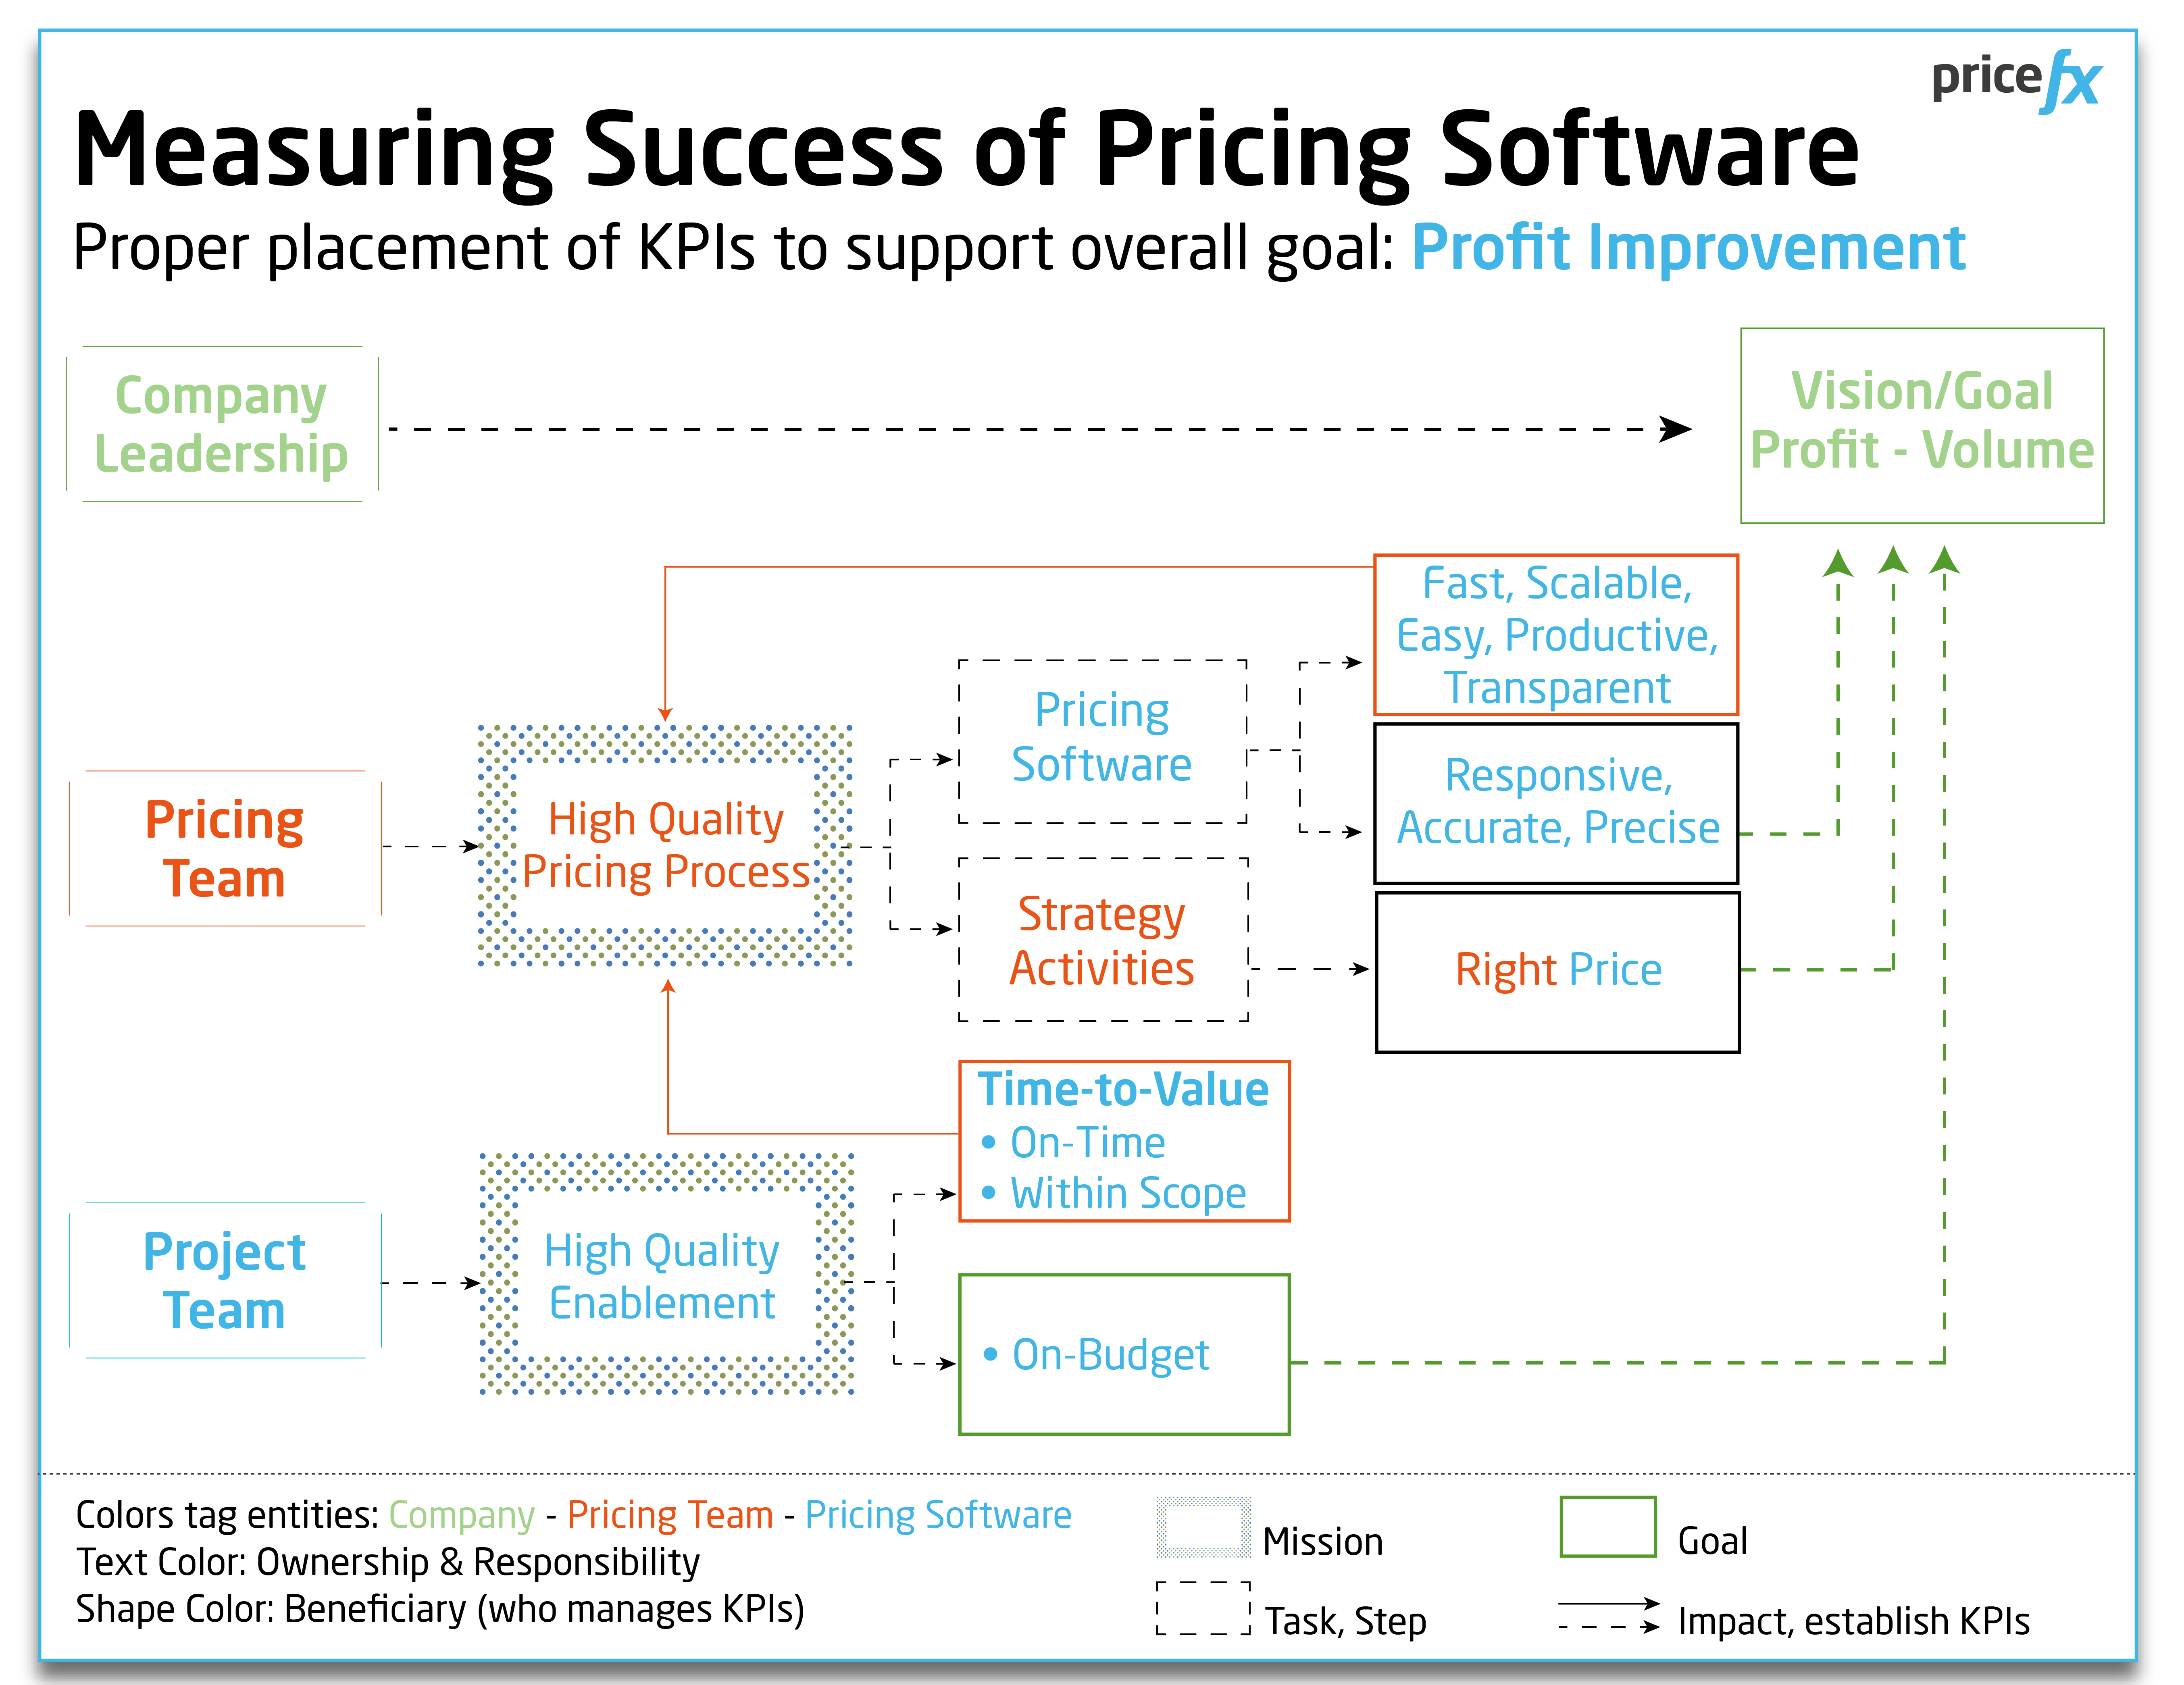 Image_Measuring-Success-of-Pricing-Software-How-Pricing-Software-Can-Be-Used-To-Navigate-a-Recession